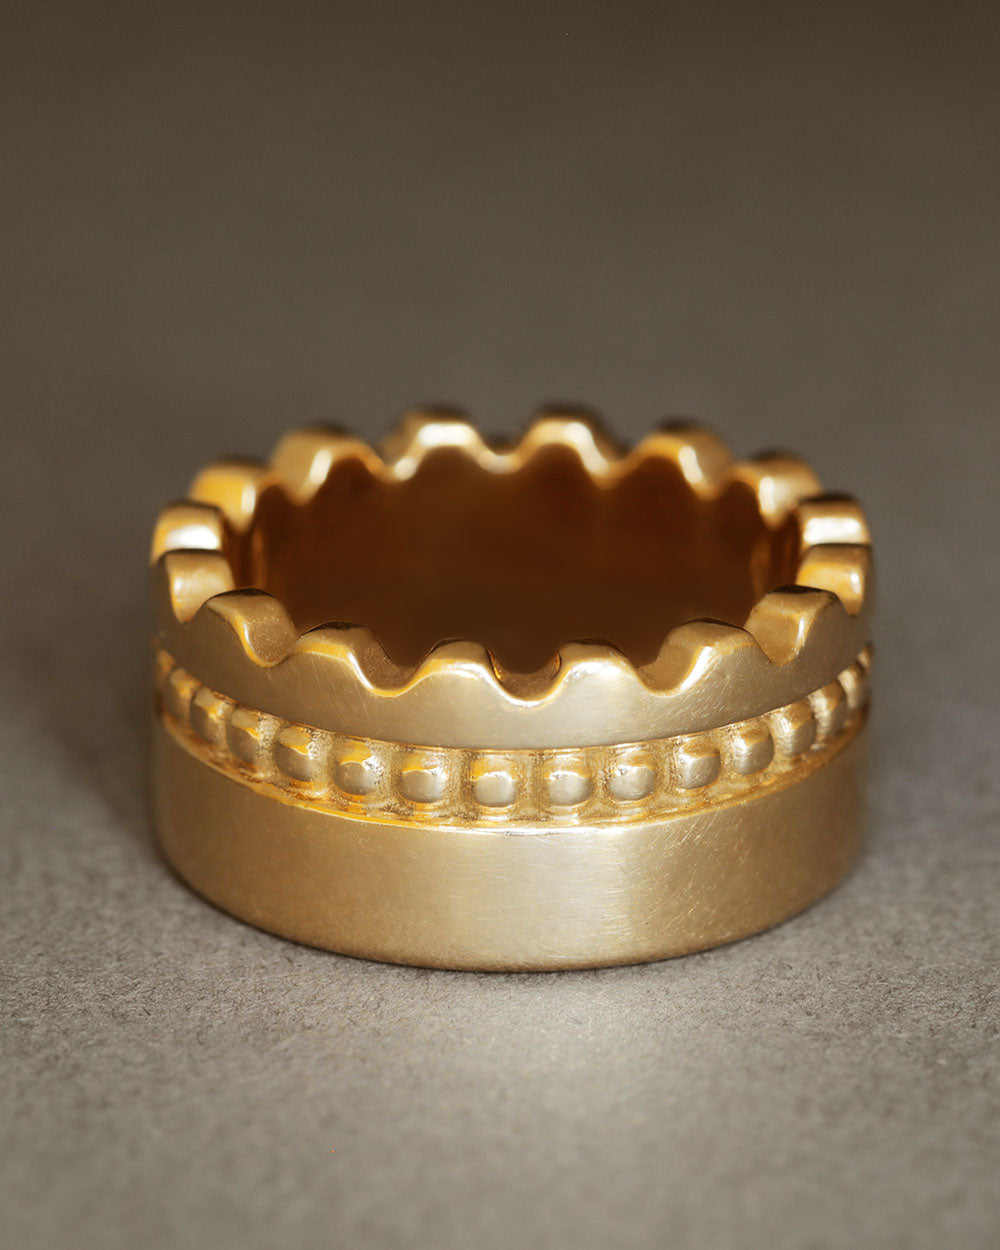 The Crown Ring by George Rings solid 18k gold cast band with beading